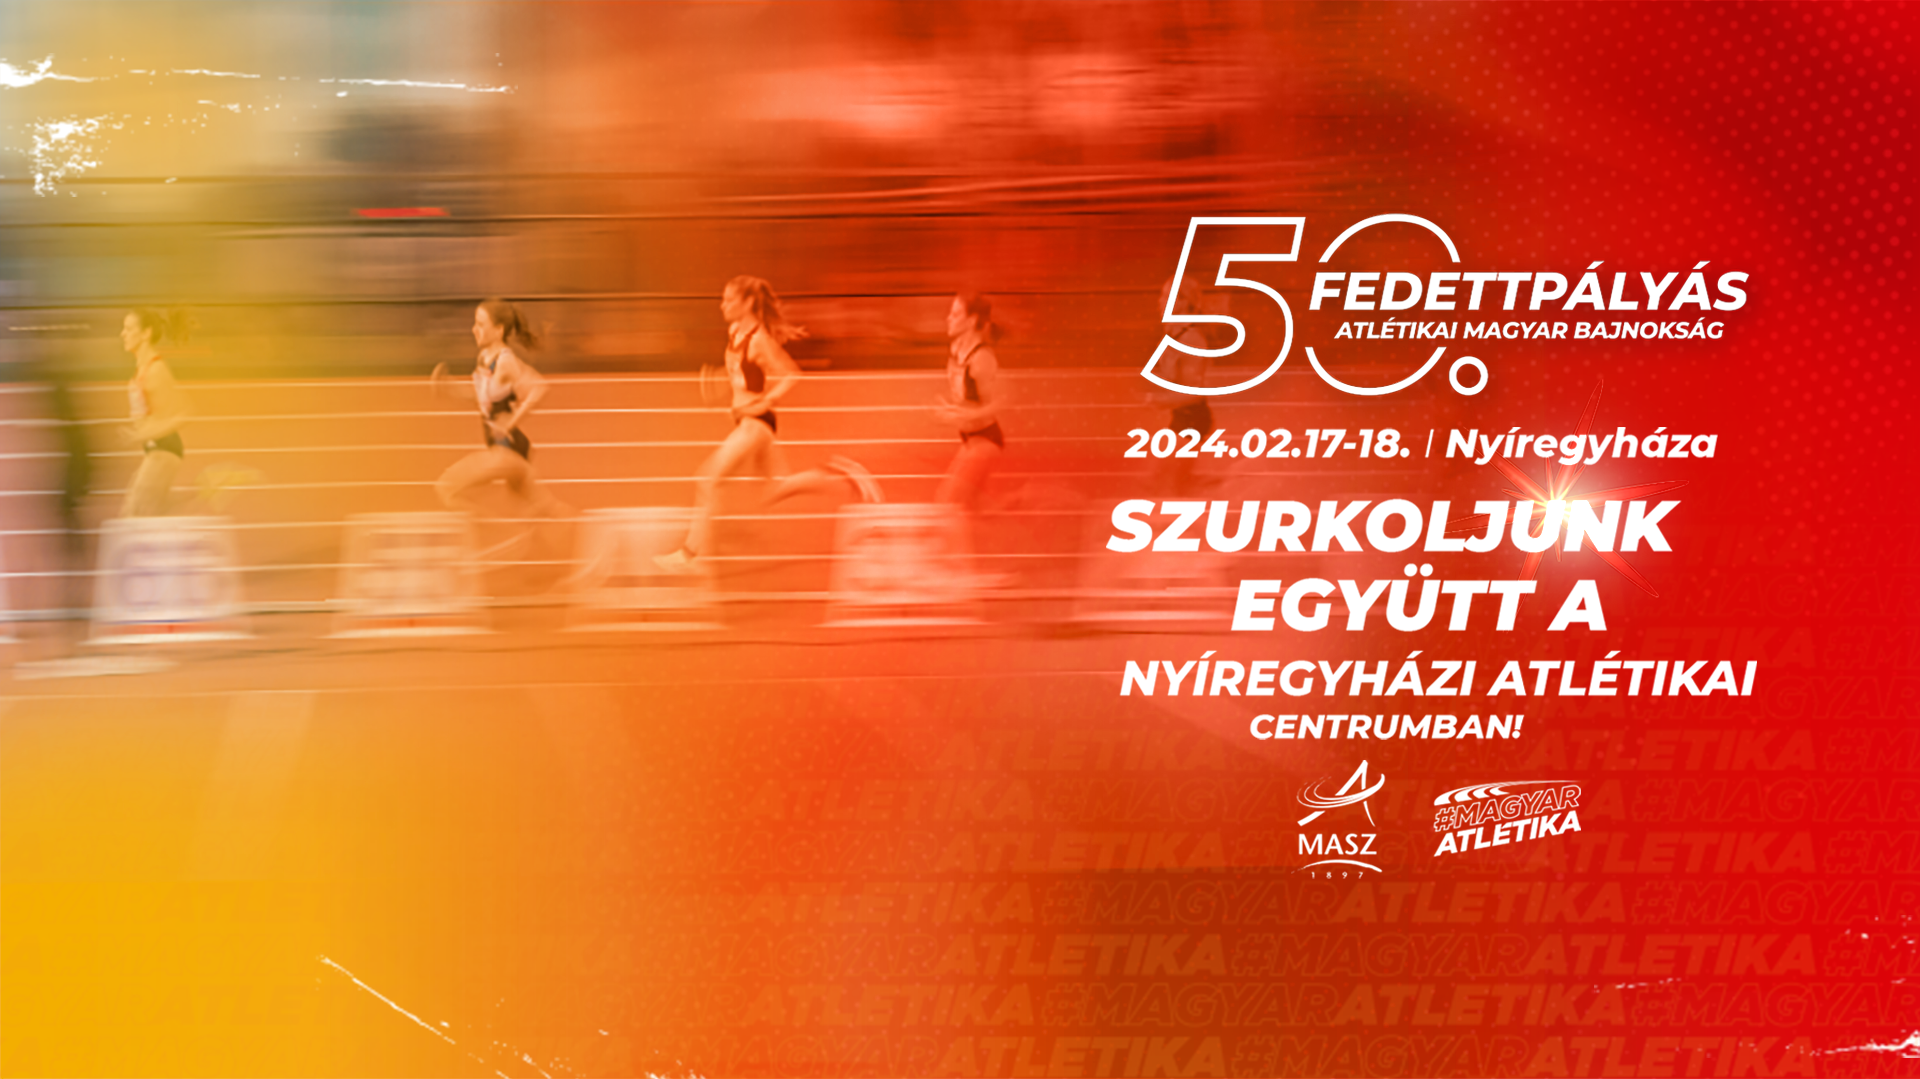 The 50th Hungarian Indoor Athletics Championships starts tomorrow